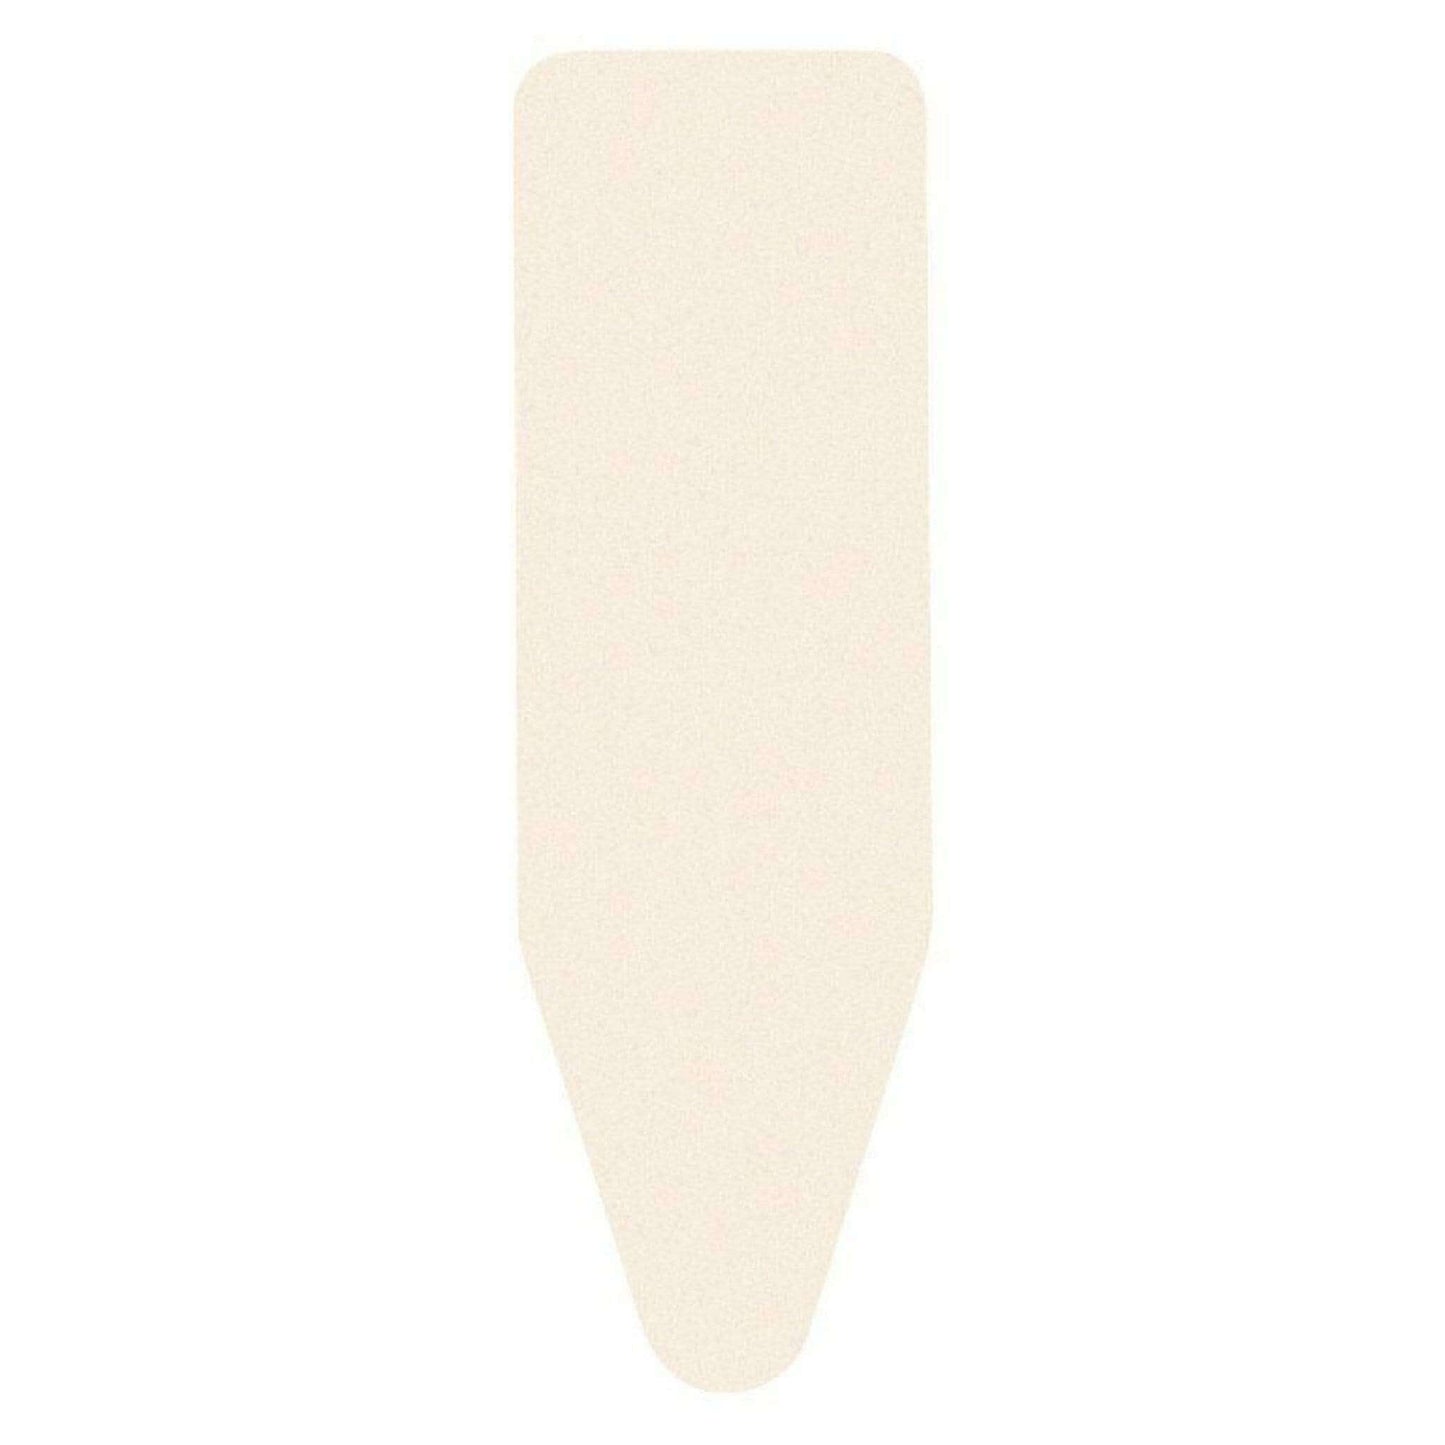 Kitchenware  -  Brabantia Neutral Ironing Board Cover 135X45  -  50015384